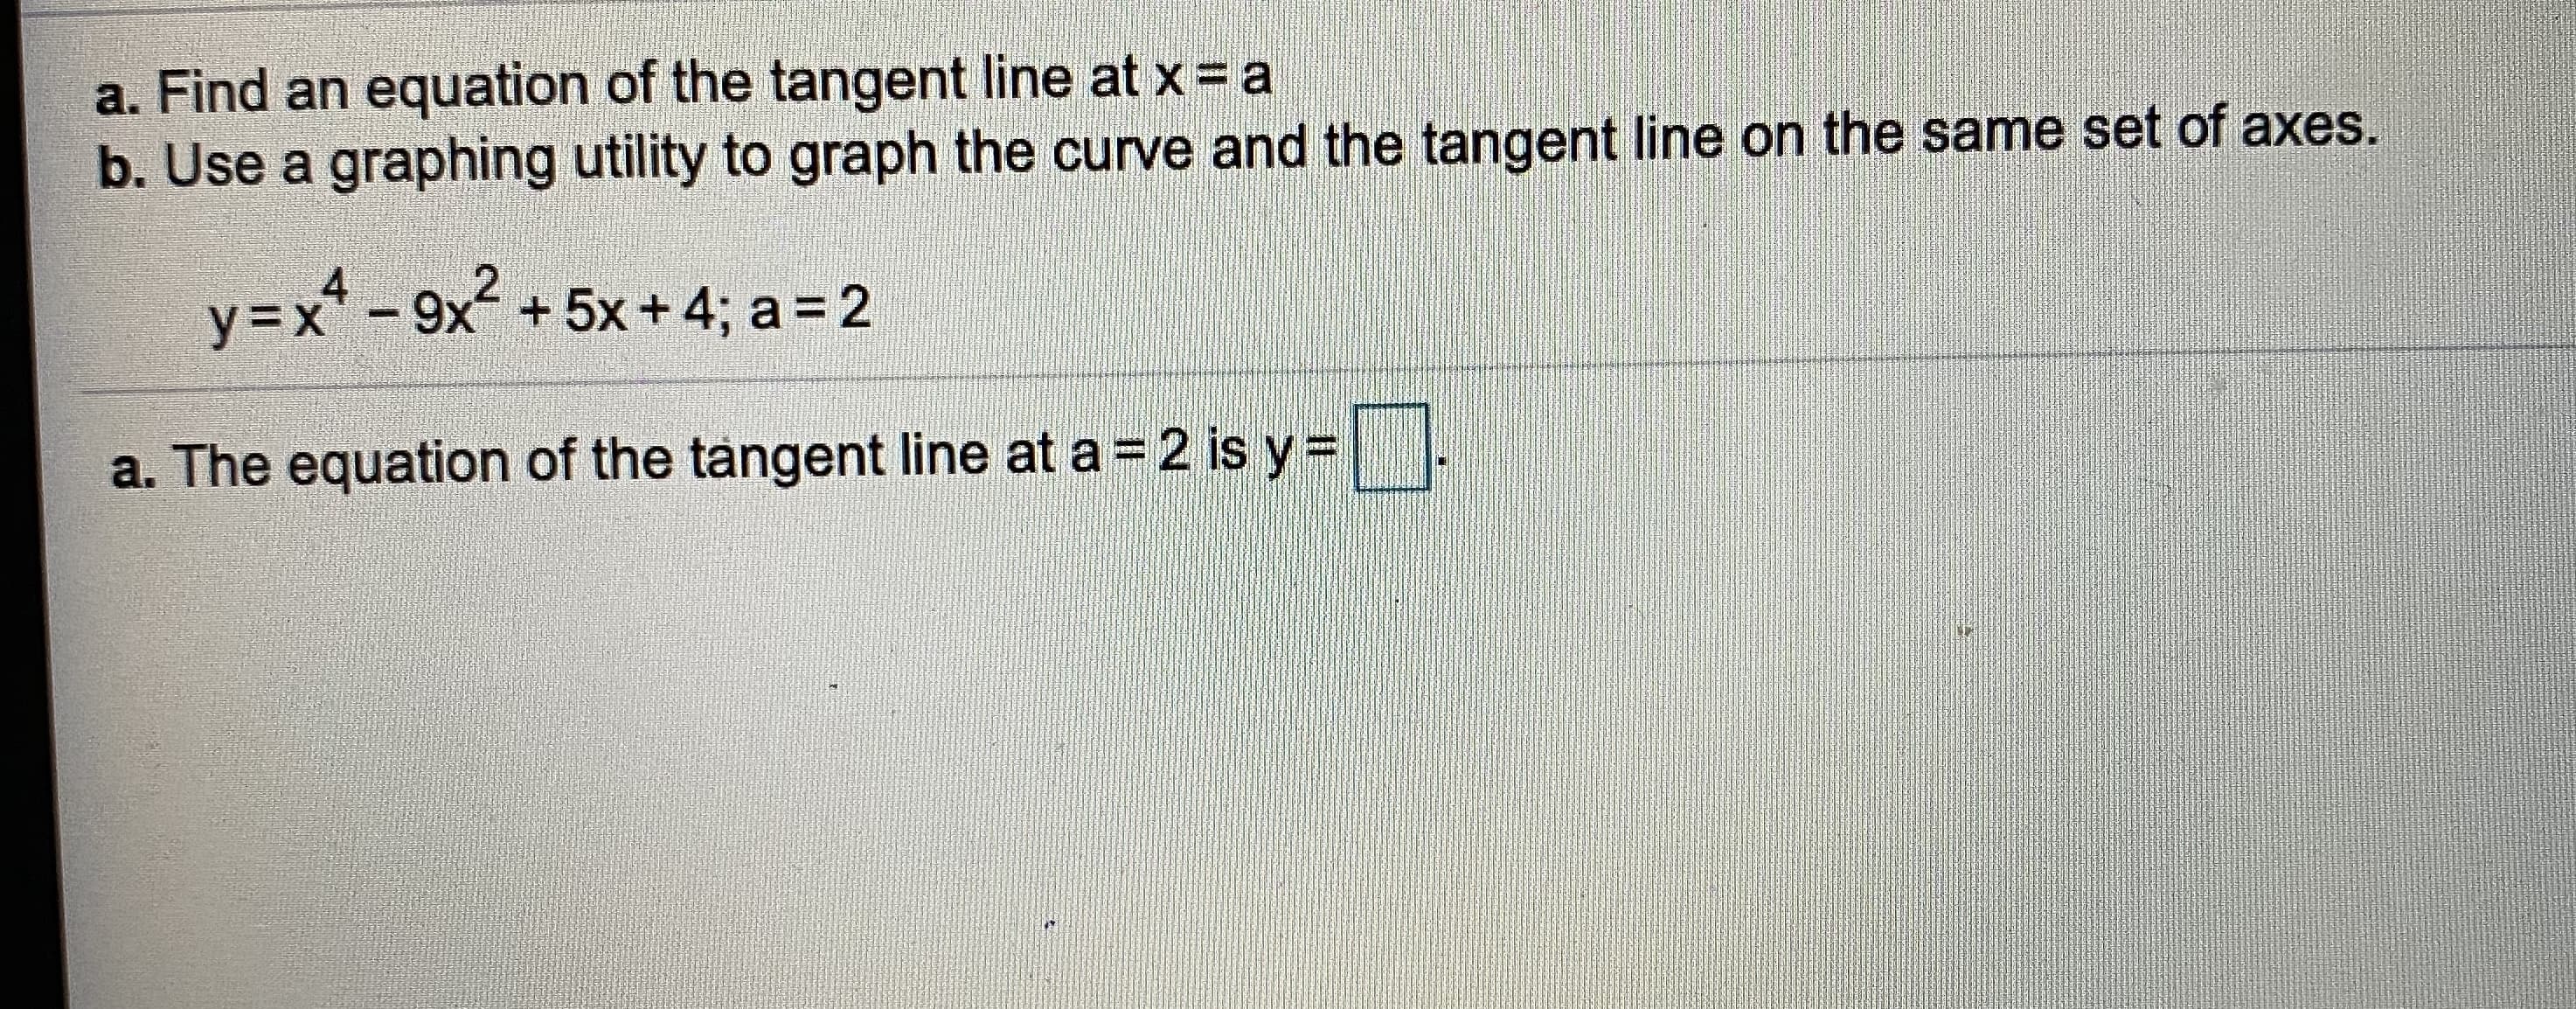 a. Find an equation of the tangent line at x= a
b. Use a graphing utility to graph the curve and the tangent line on the same set of axes.
4
y=x* - 9x + 5x+ 4; a = 2
